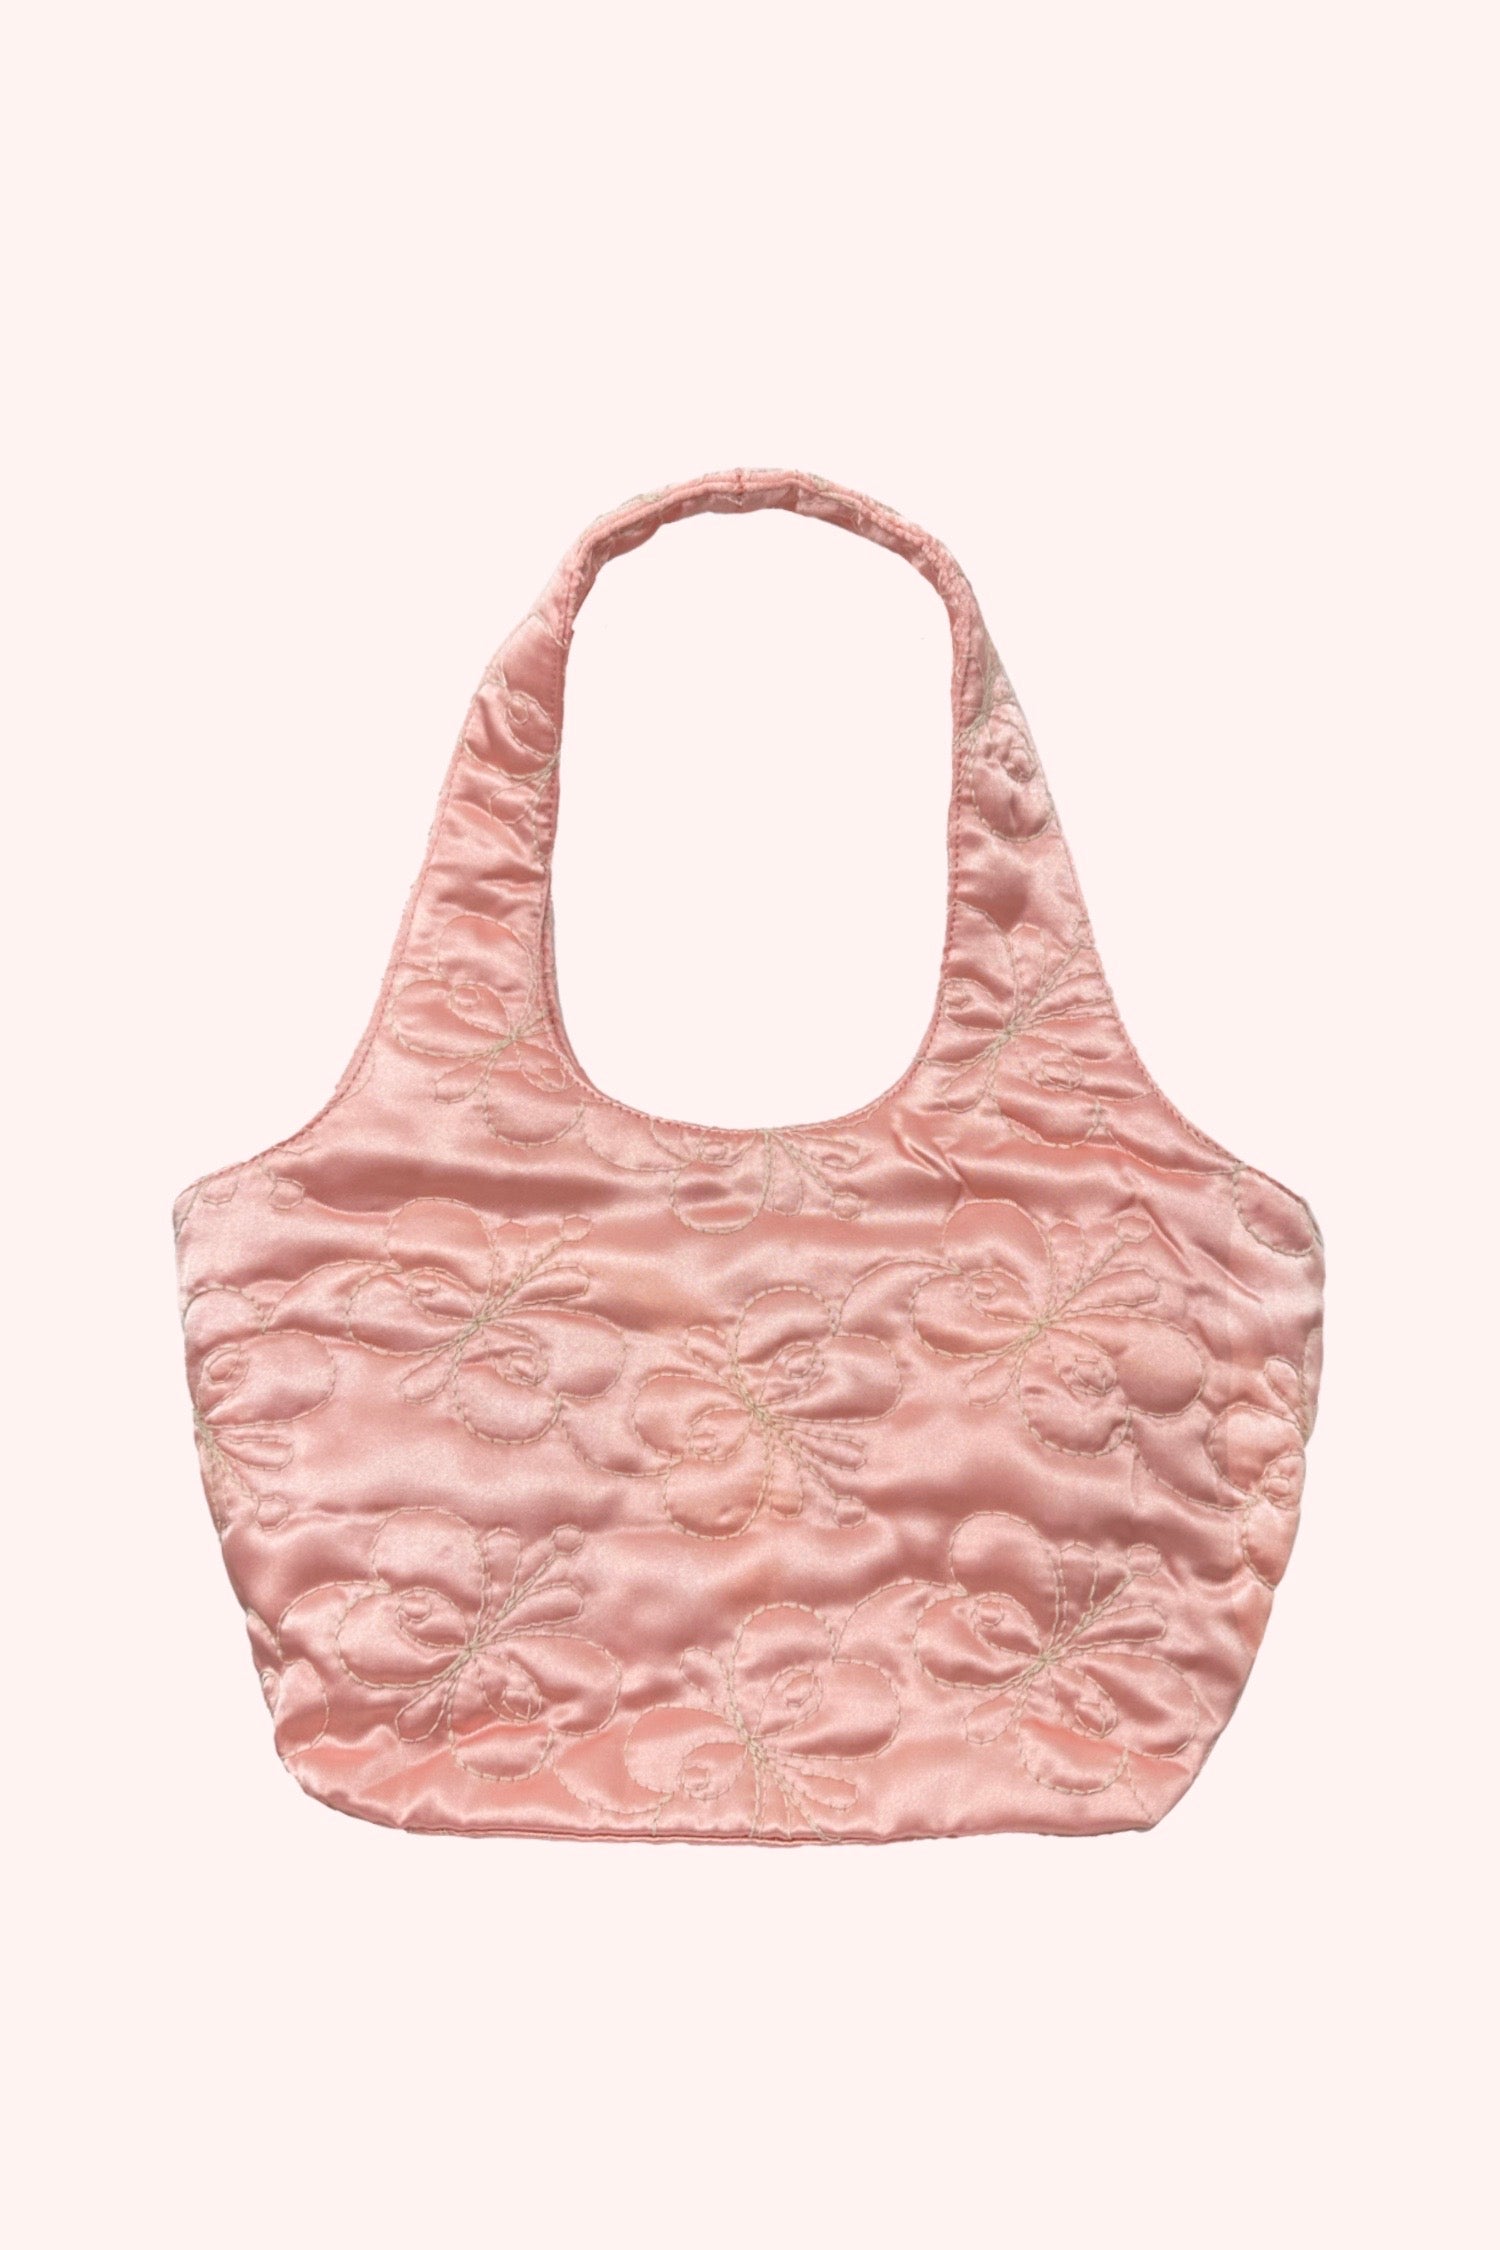 Pink Mini Bag, trapezoidal-shaped, Butterfly embroidery, handles incorporated to bag body